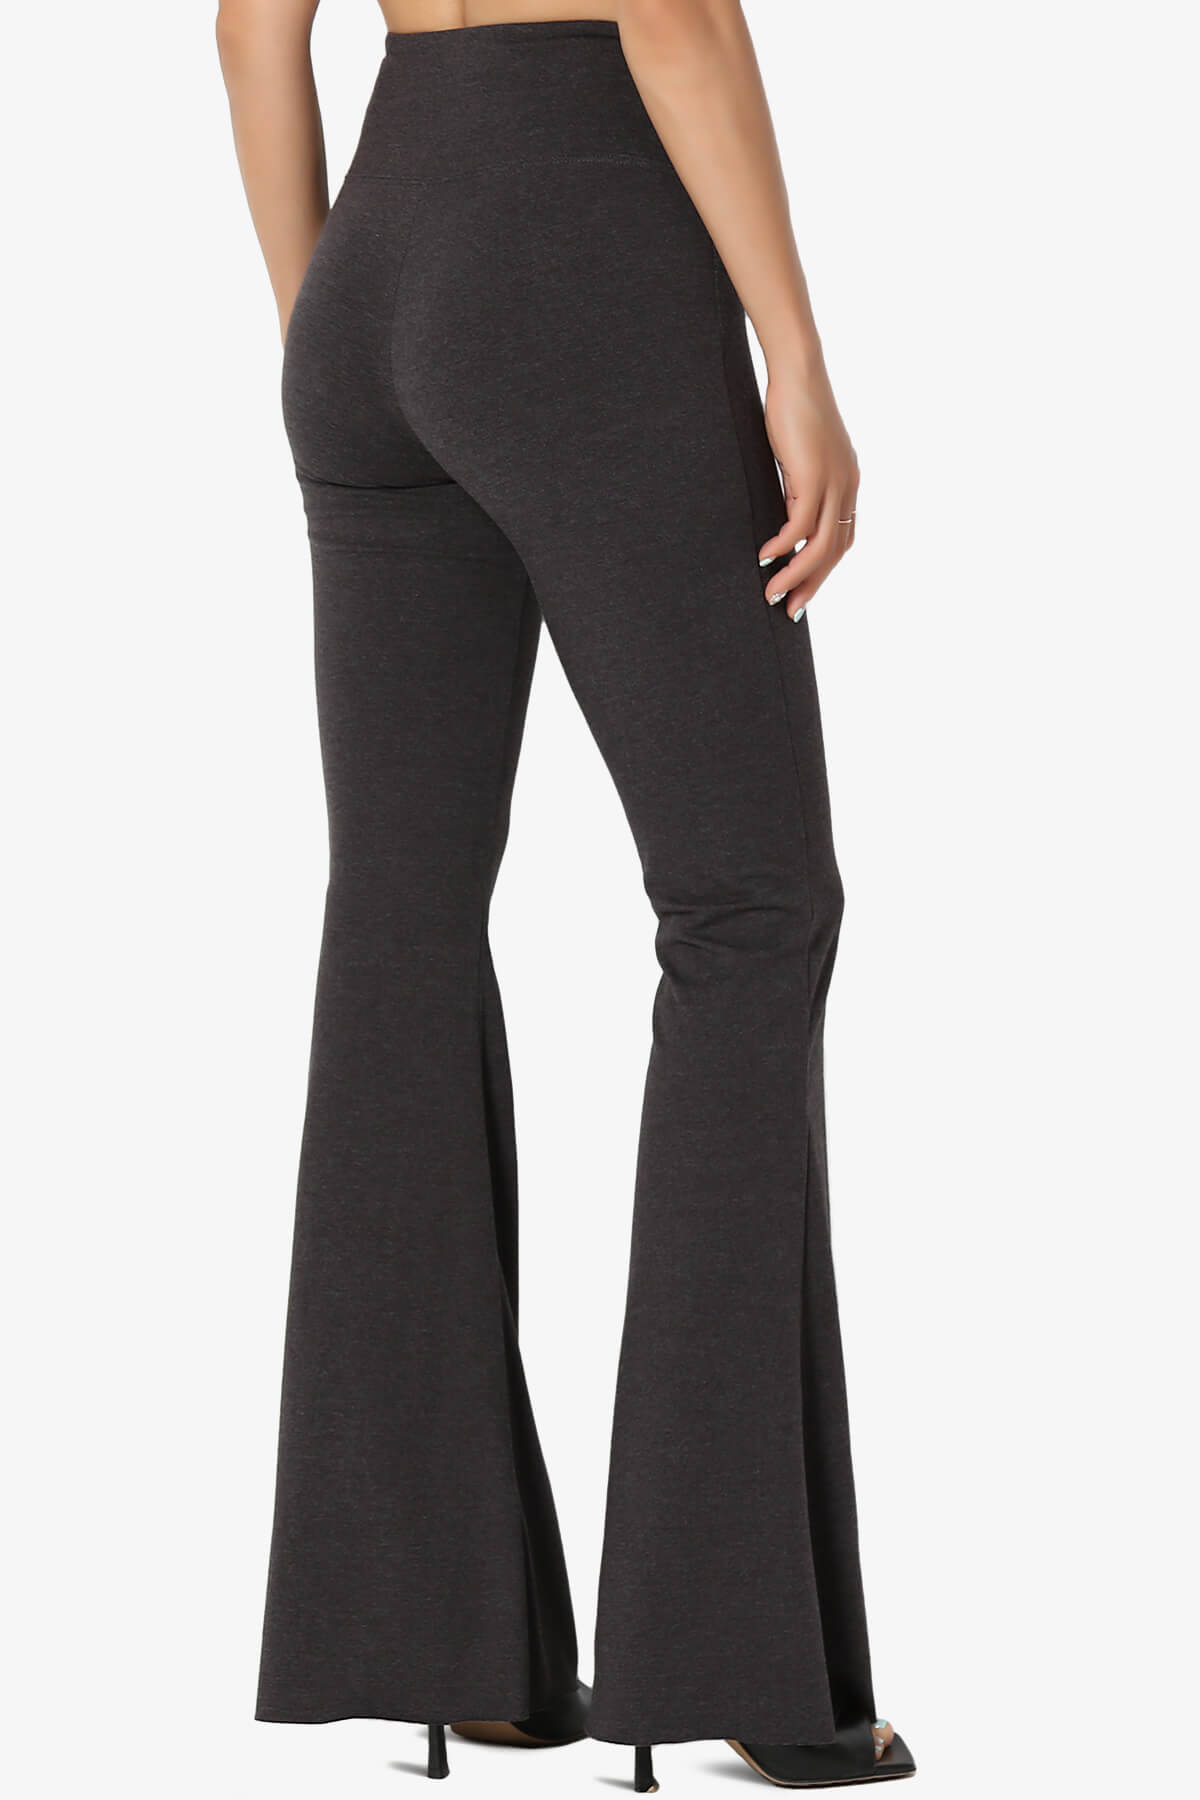 Load image into Gallery viewer, Zaylee Raw Hem Flared Comfy Yoga Pants CHARCOAL_4
